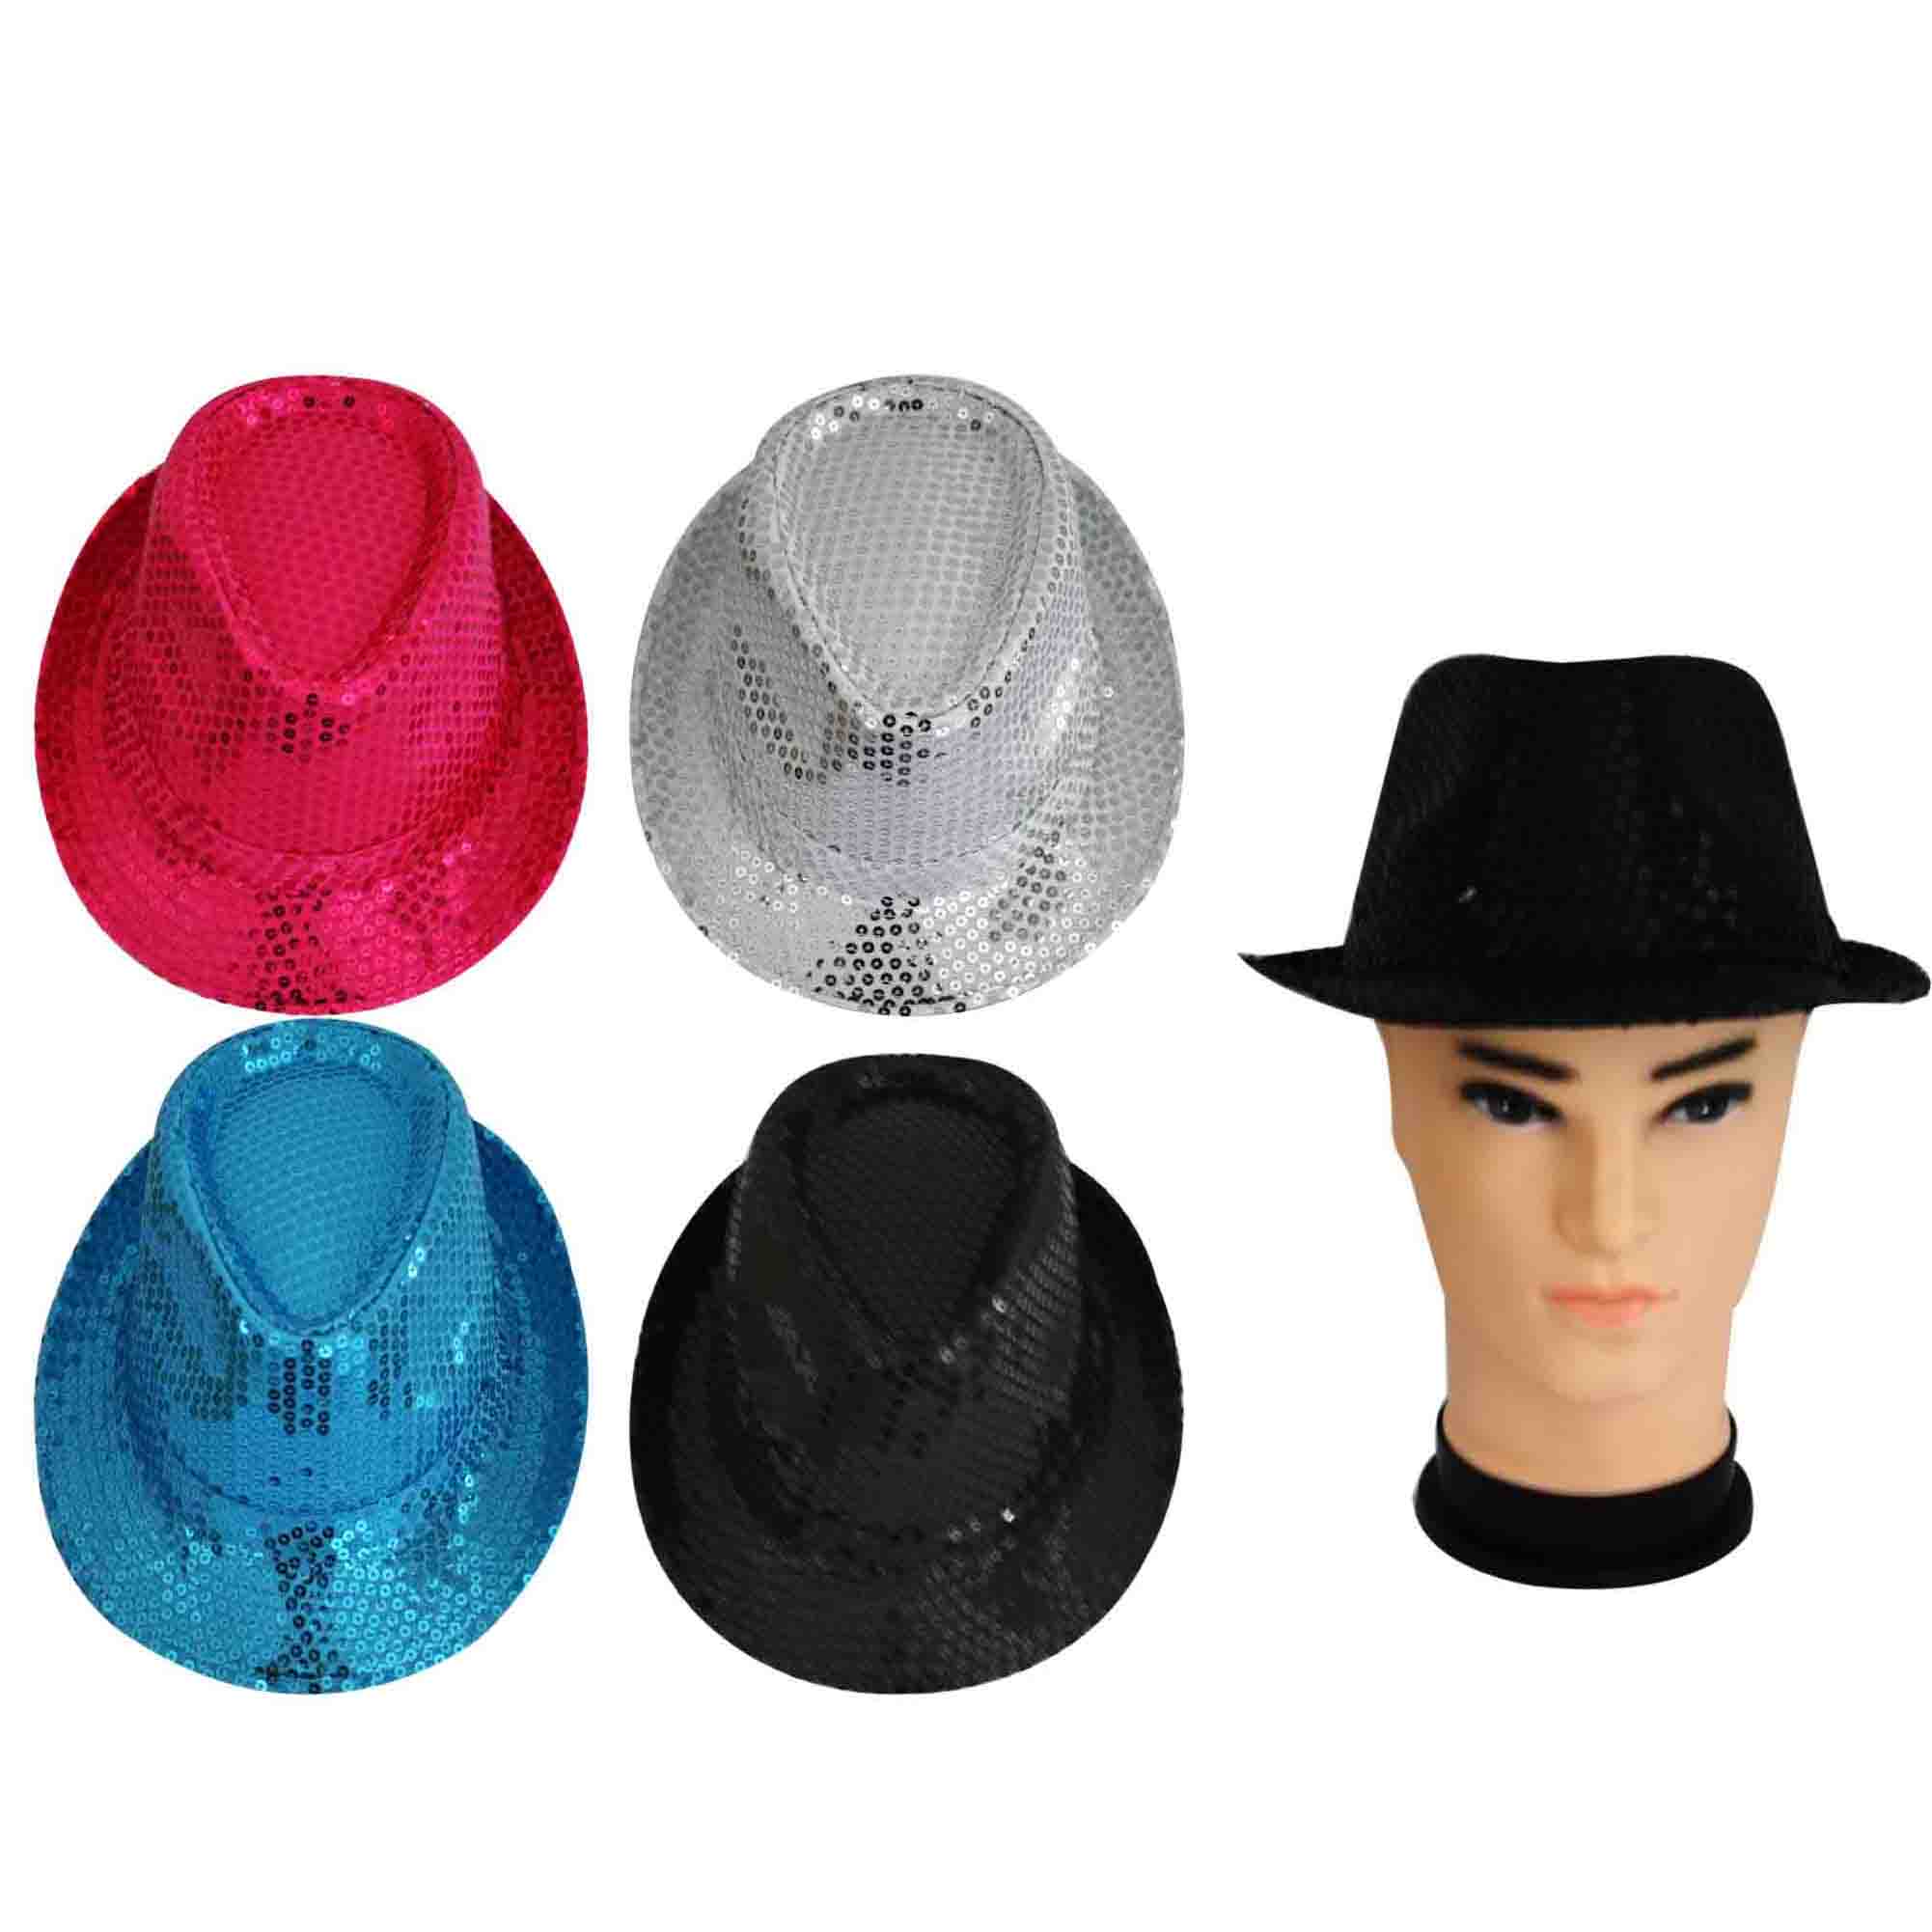 Sequin Gangster Hat Adult - 1 Piece Assorted - Dollars and Sense